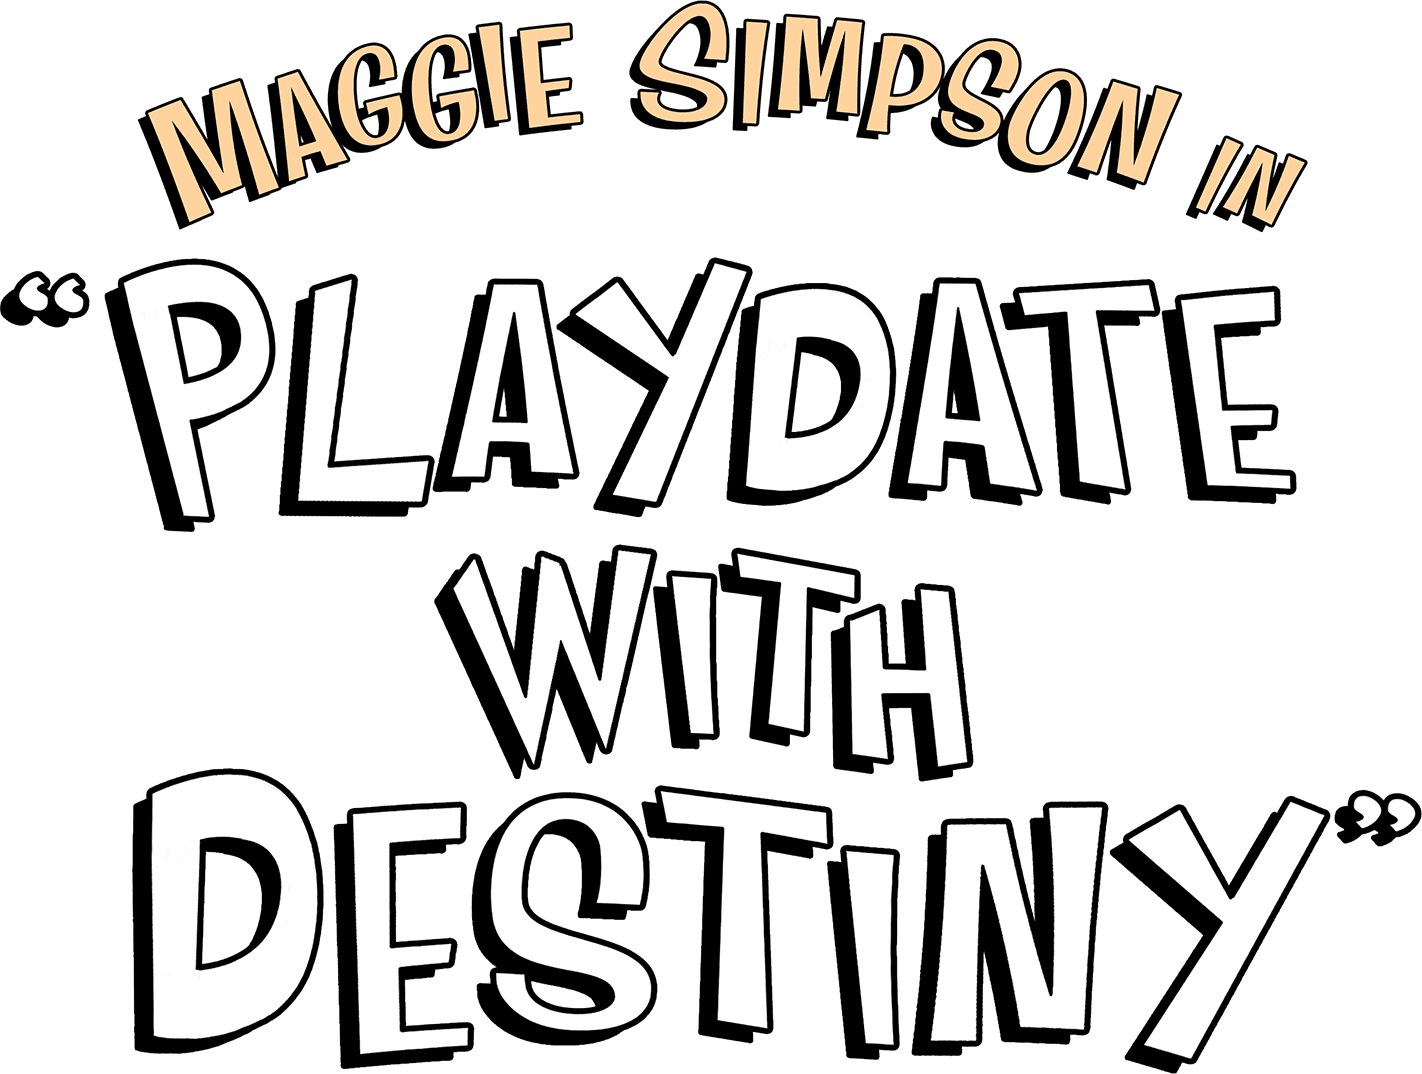 Maggie Simpson in "Playdate with Destiny" logo